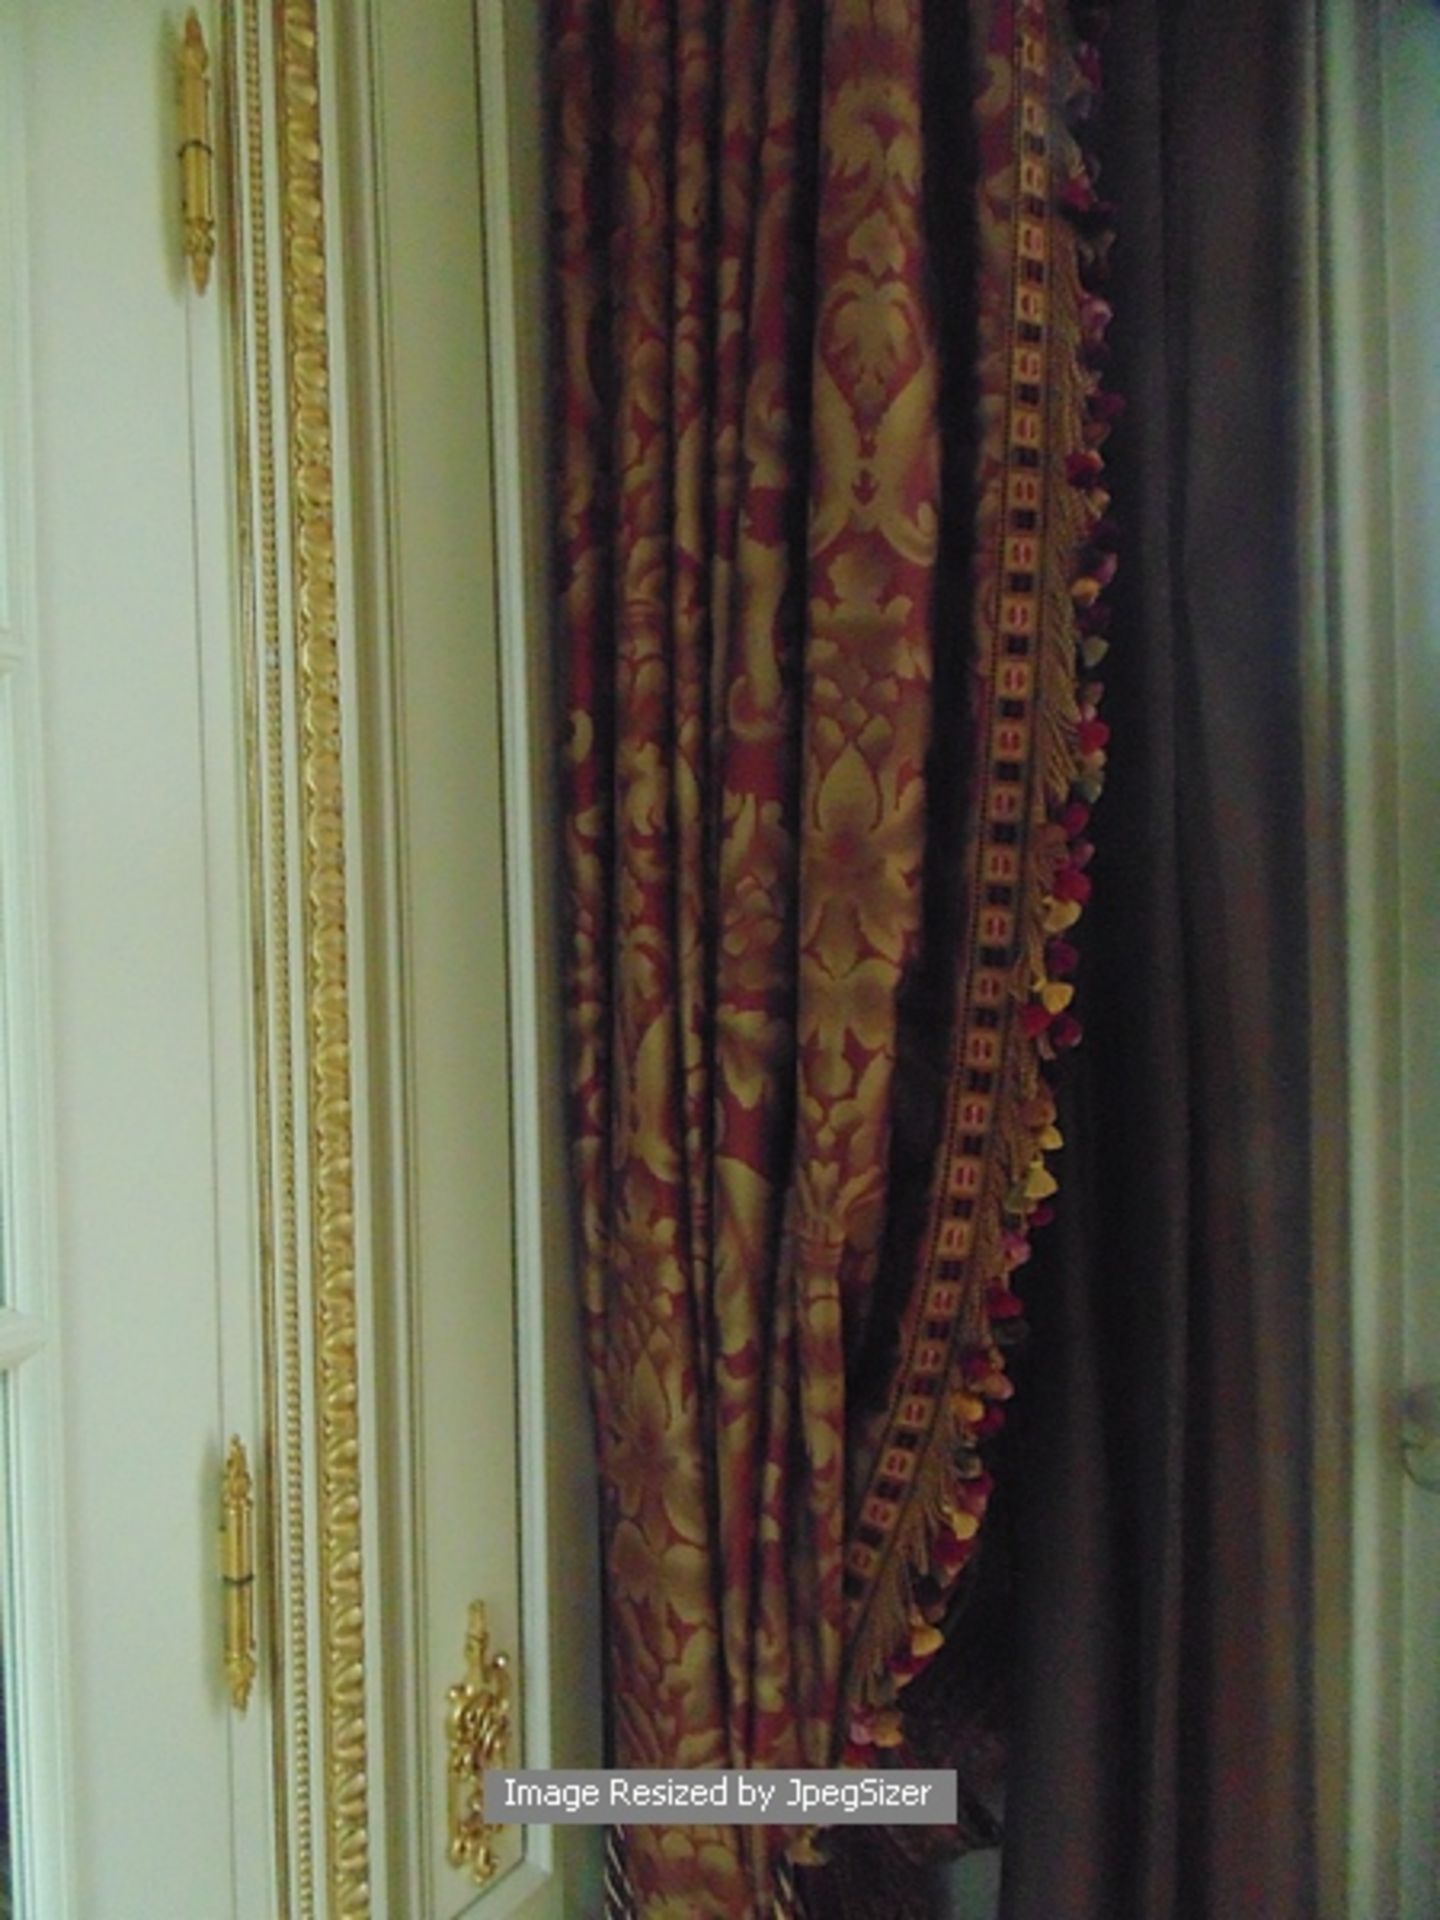 A pair of gold and burgundy curtains supplied by Jacquard gold and burgundy fabric from Marvi - Image 3 of 4